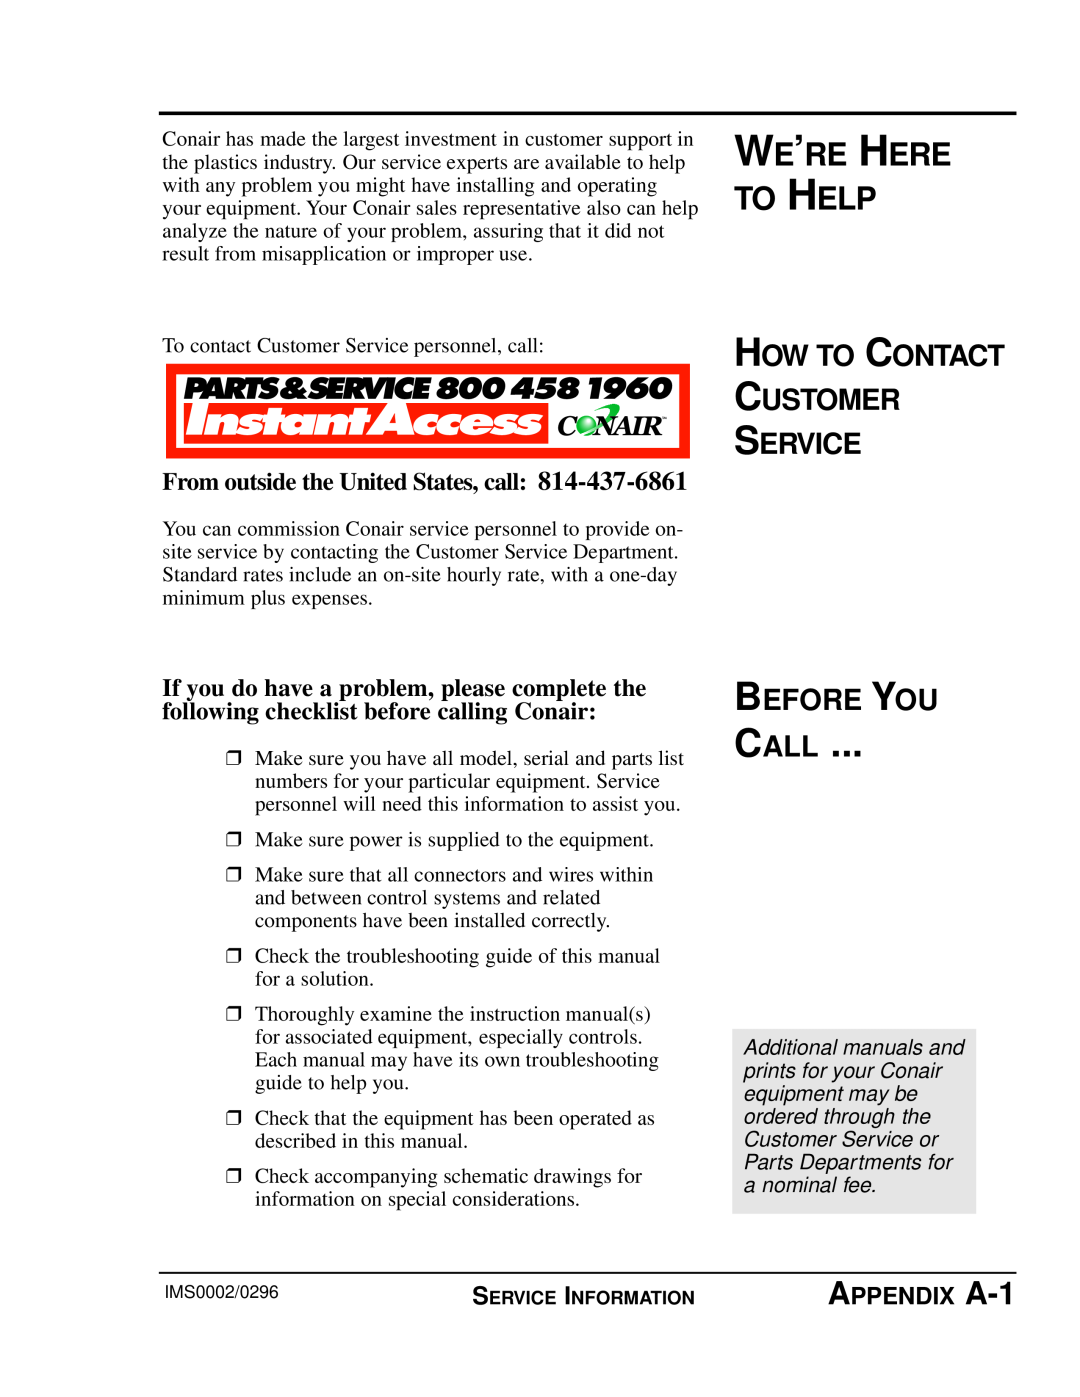 Conair GB/ WSB manual We’Re Here To Help, APPENDIX A-1, Call, How To Contact Customer Service, Before You 